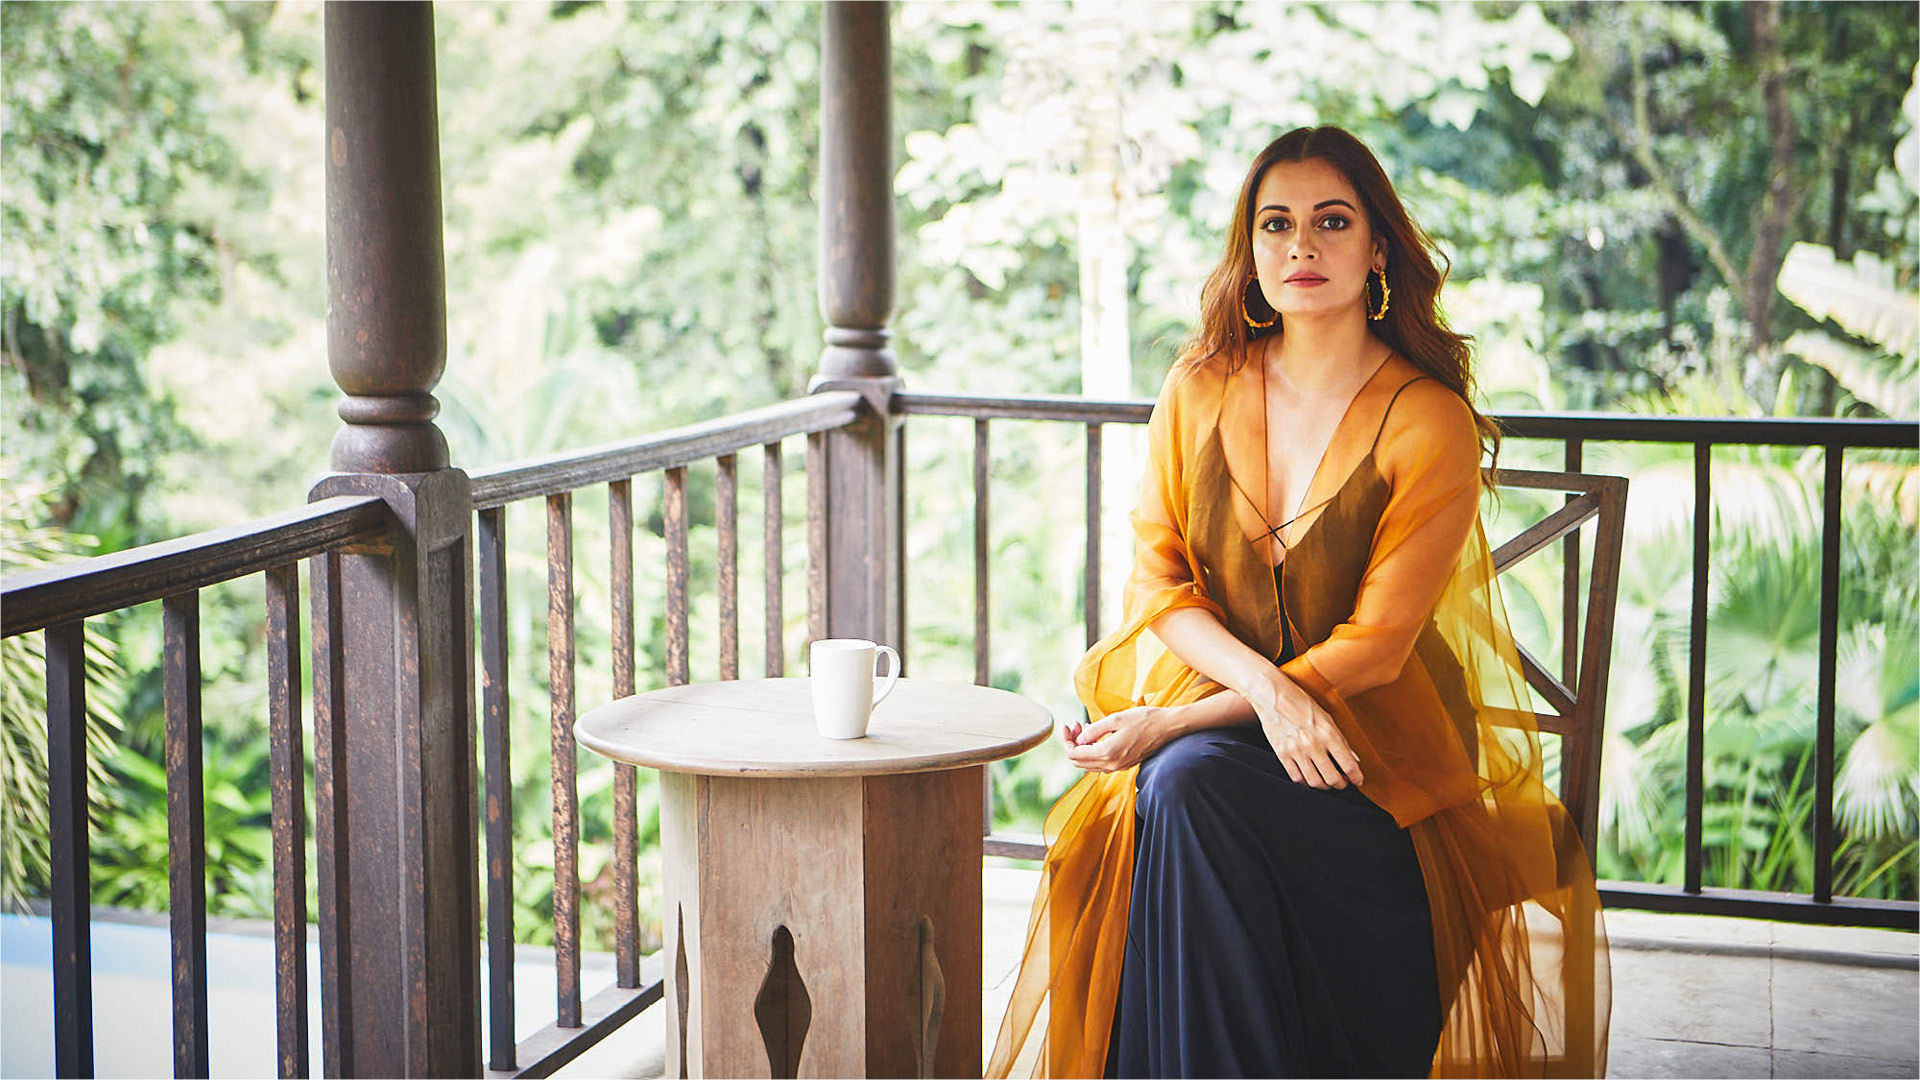 Airbnb Goa with Travel+Leisure India Launches Cover Integration Campaign Featuring Dia Mirza